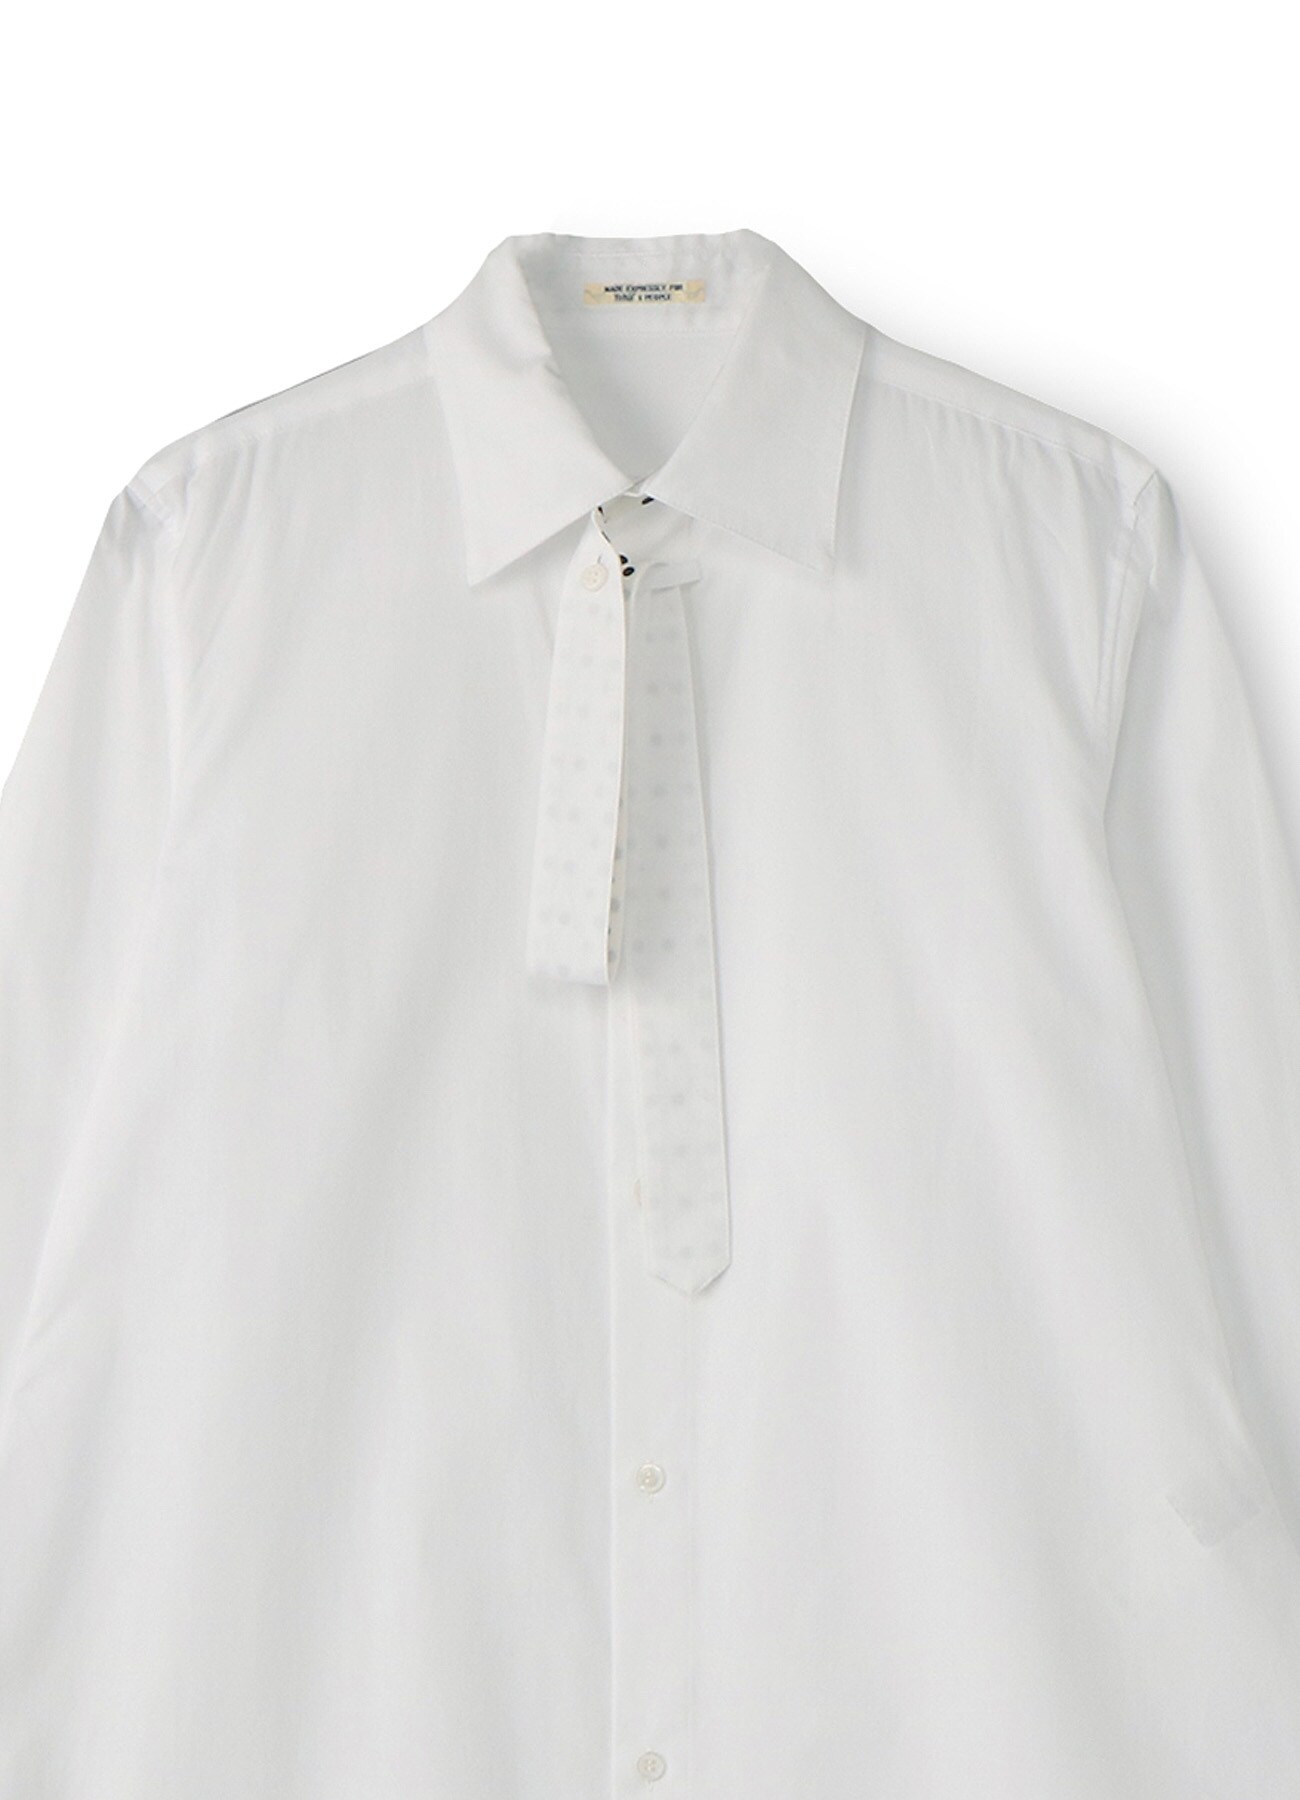 100/2 BROAD R-BOW TIE SHIRT